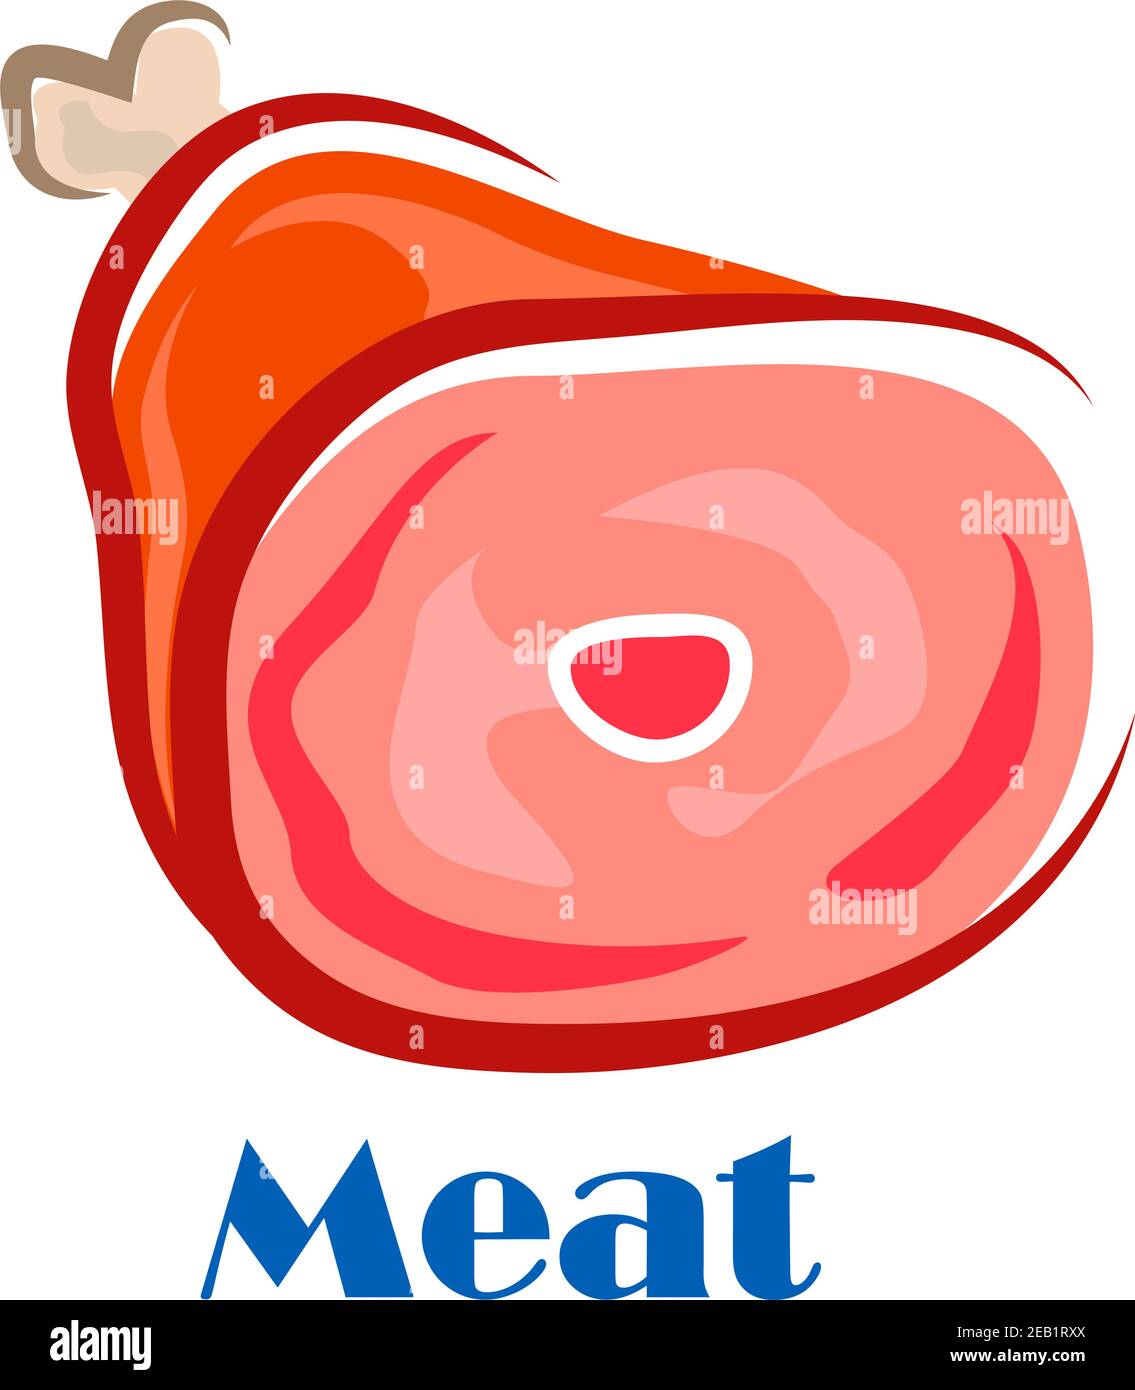 Meat Poster In Cartoon Style Depicting Fresh Pork Or Beef Leg With Bone Suitable For Butcher 